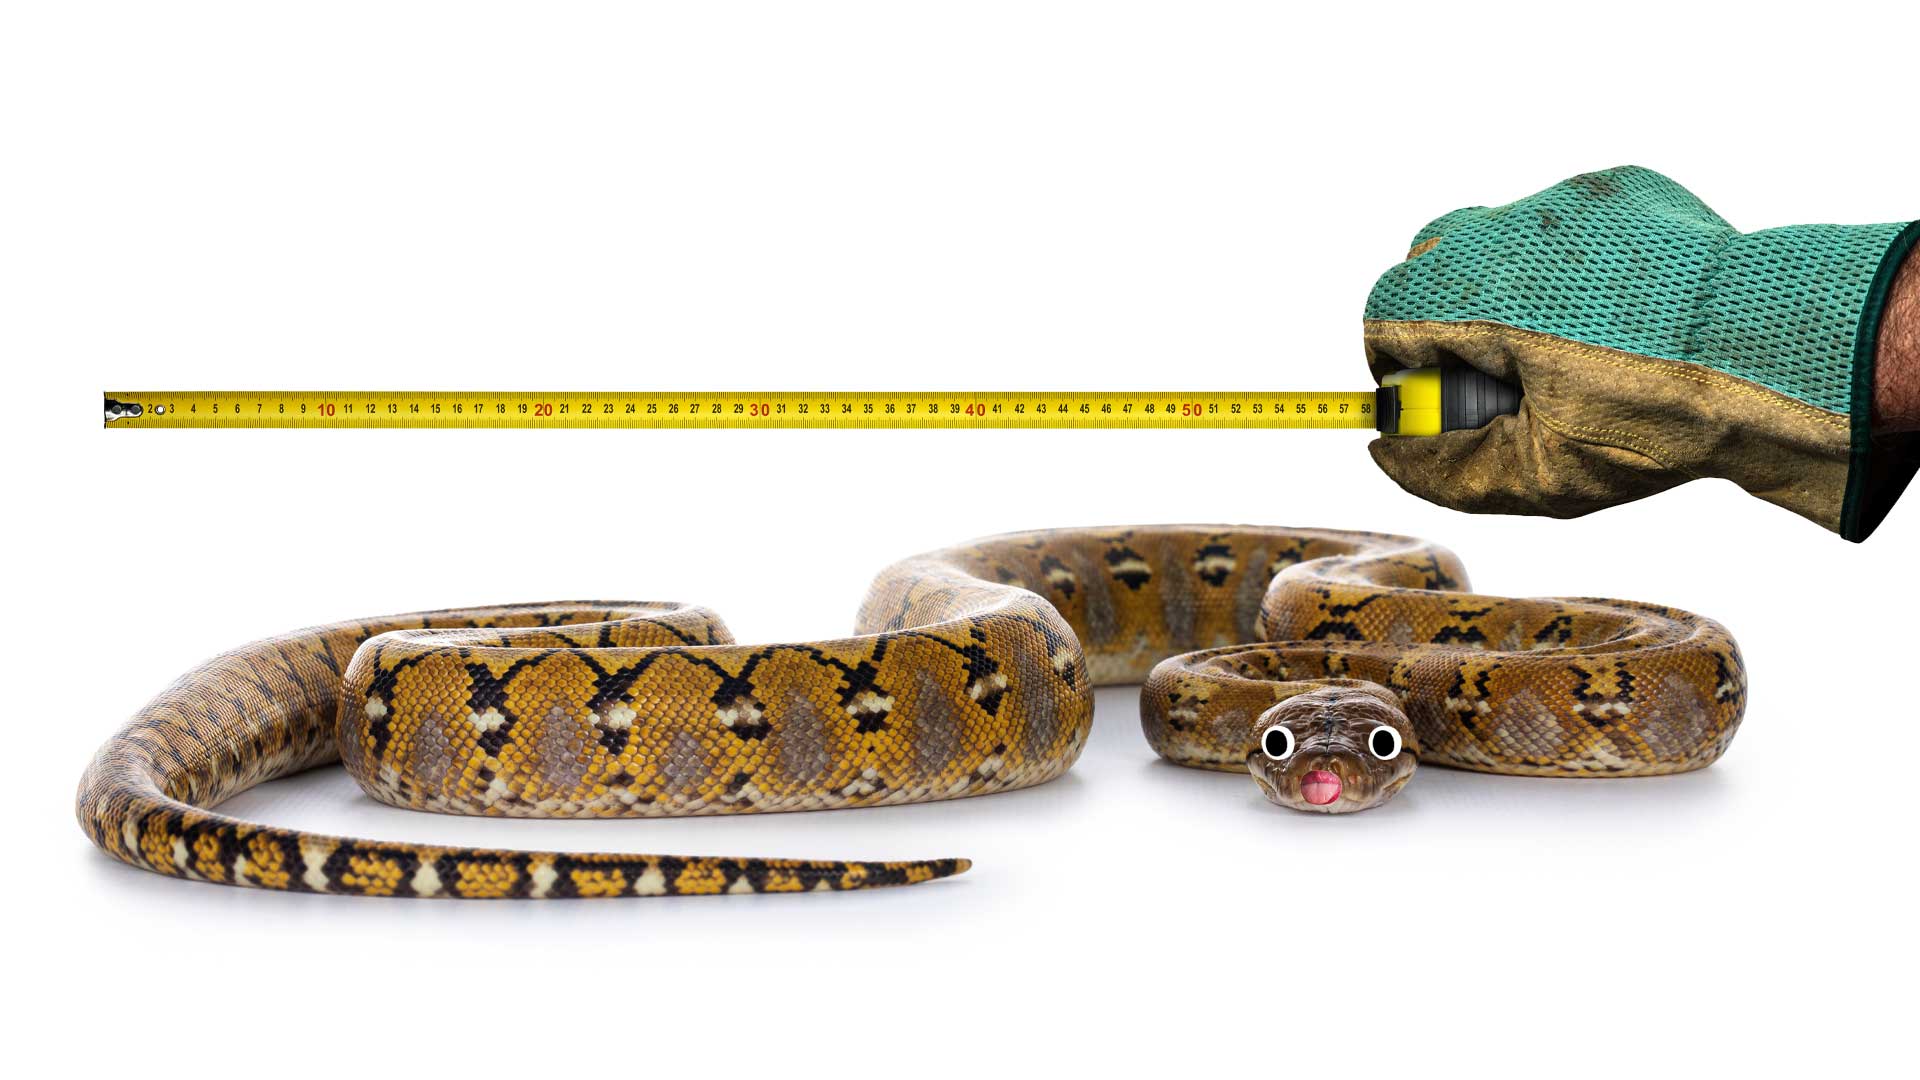 A reticulated python being measured with a tape measure